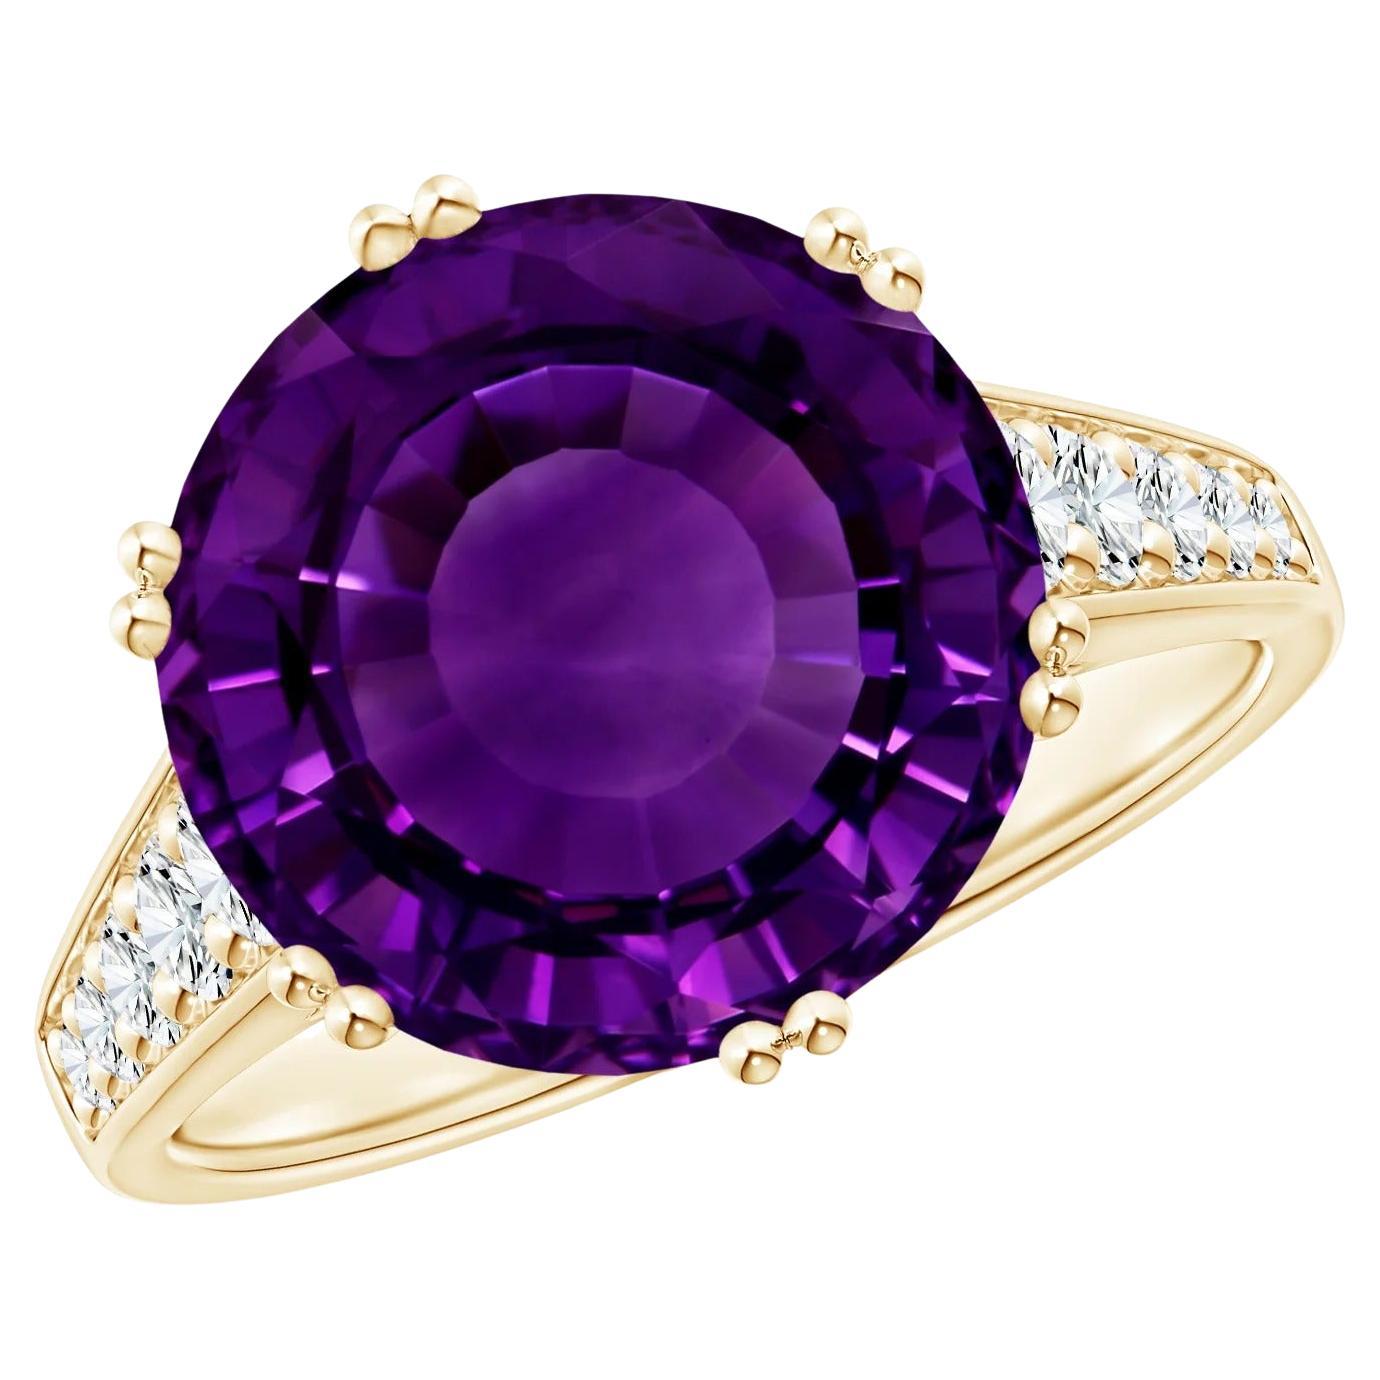 For Sale:  ANGARA GIA Certified Natural Amethyst Cocktail Ring in Yellow Gold with Diamonds